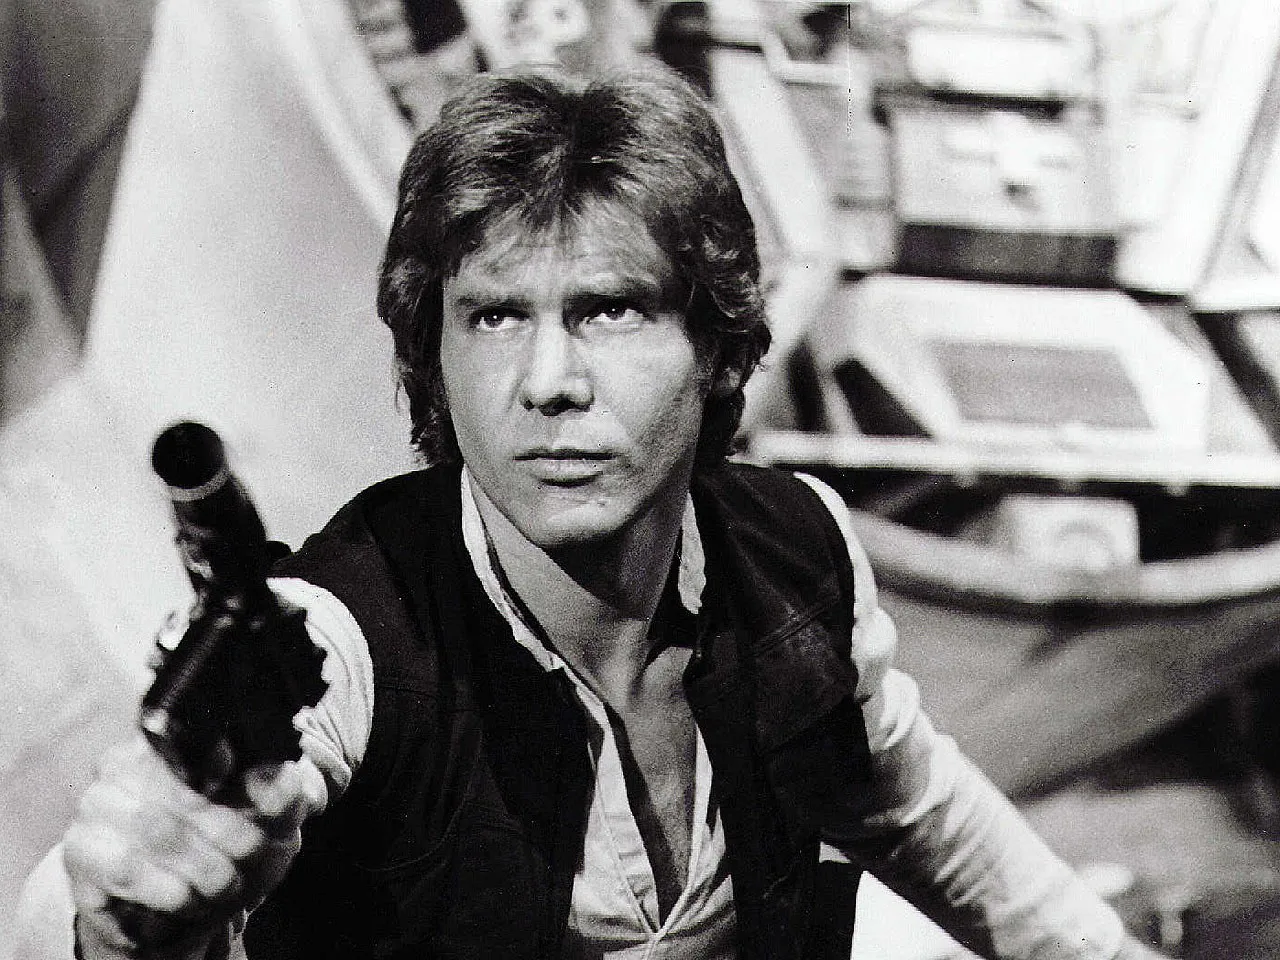 Who Plays Han Solo in Star Wars